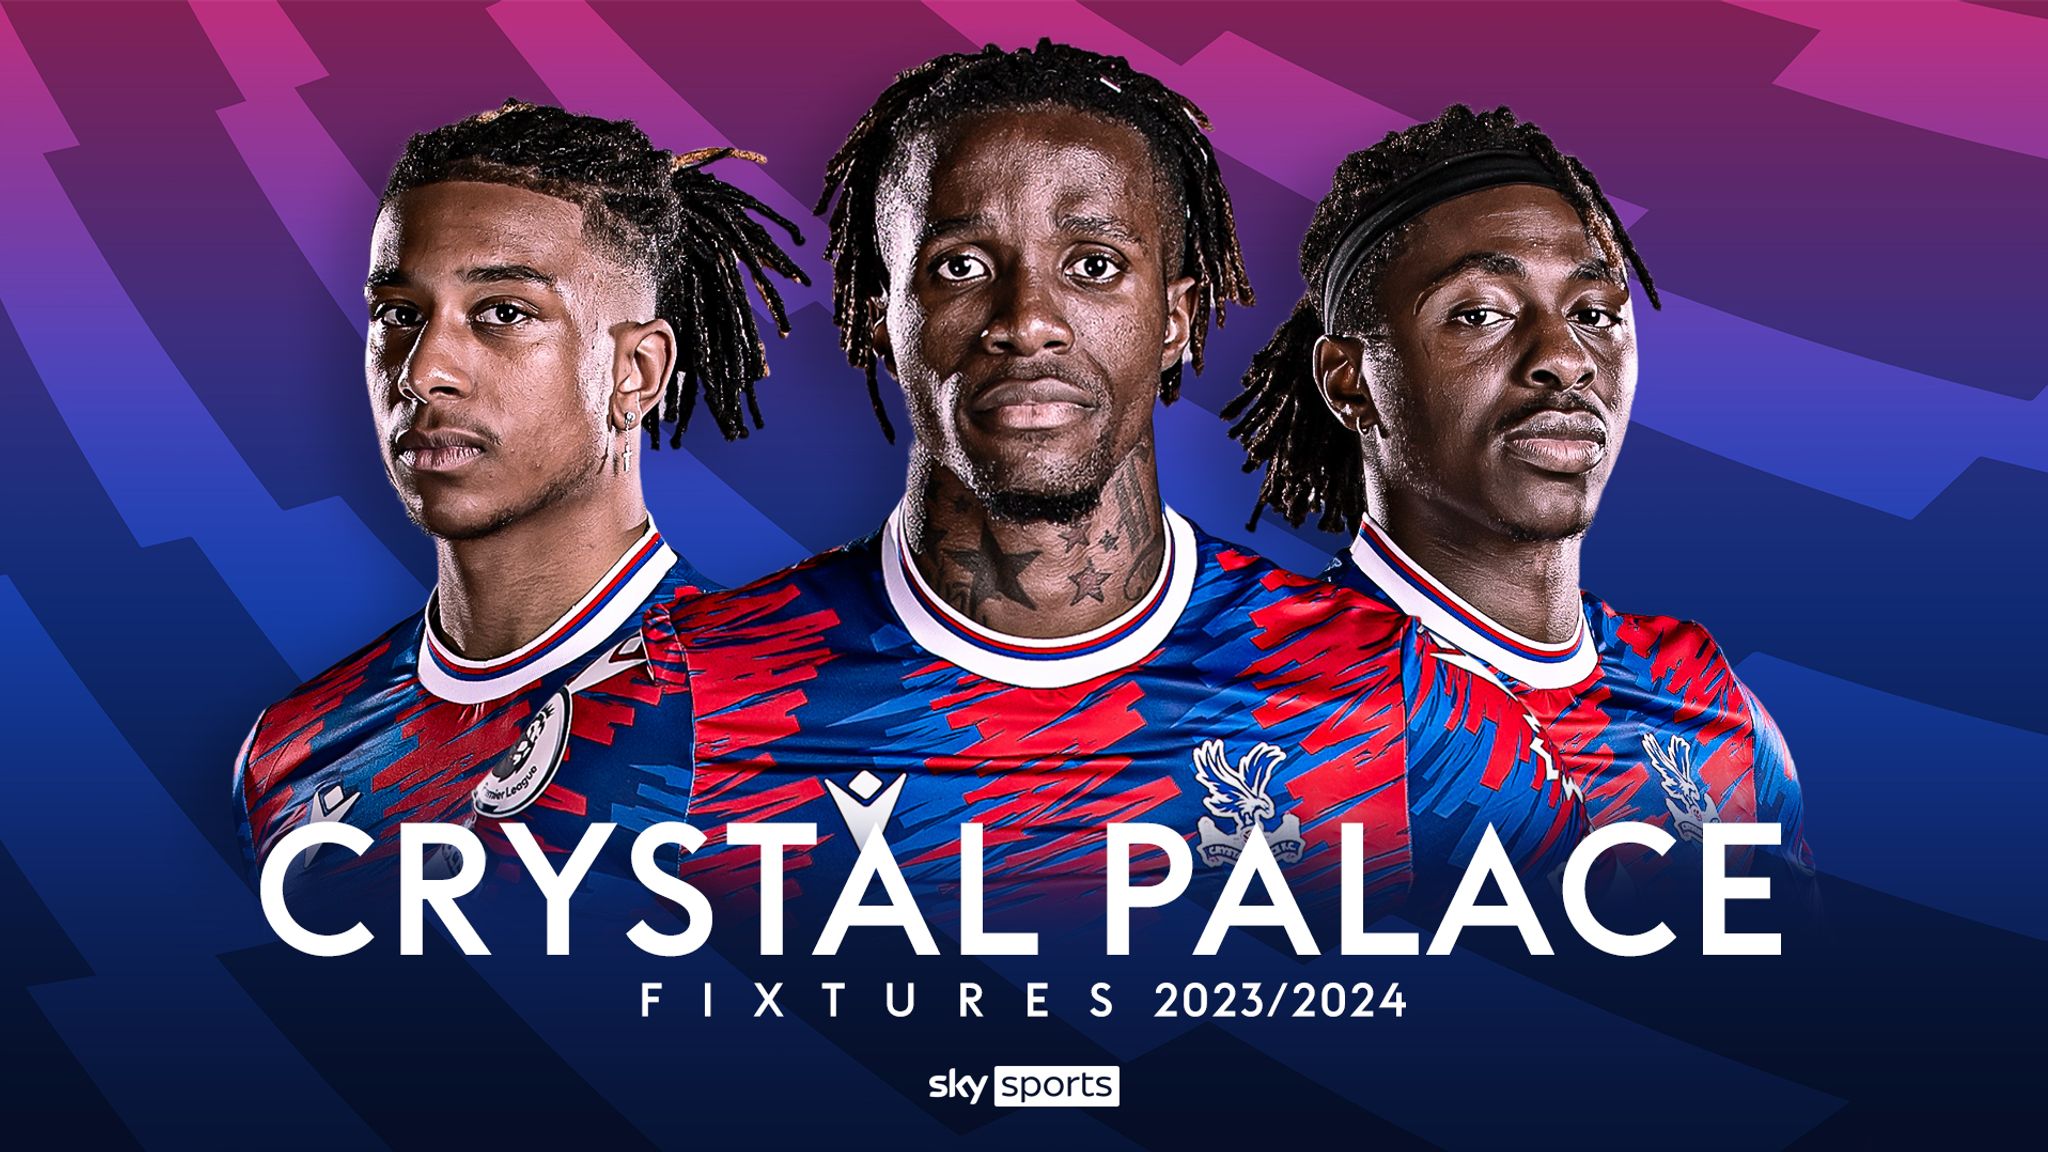 Crystal Palace Premier League 2023/24 fixtures and schedule Football